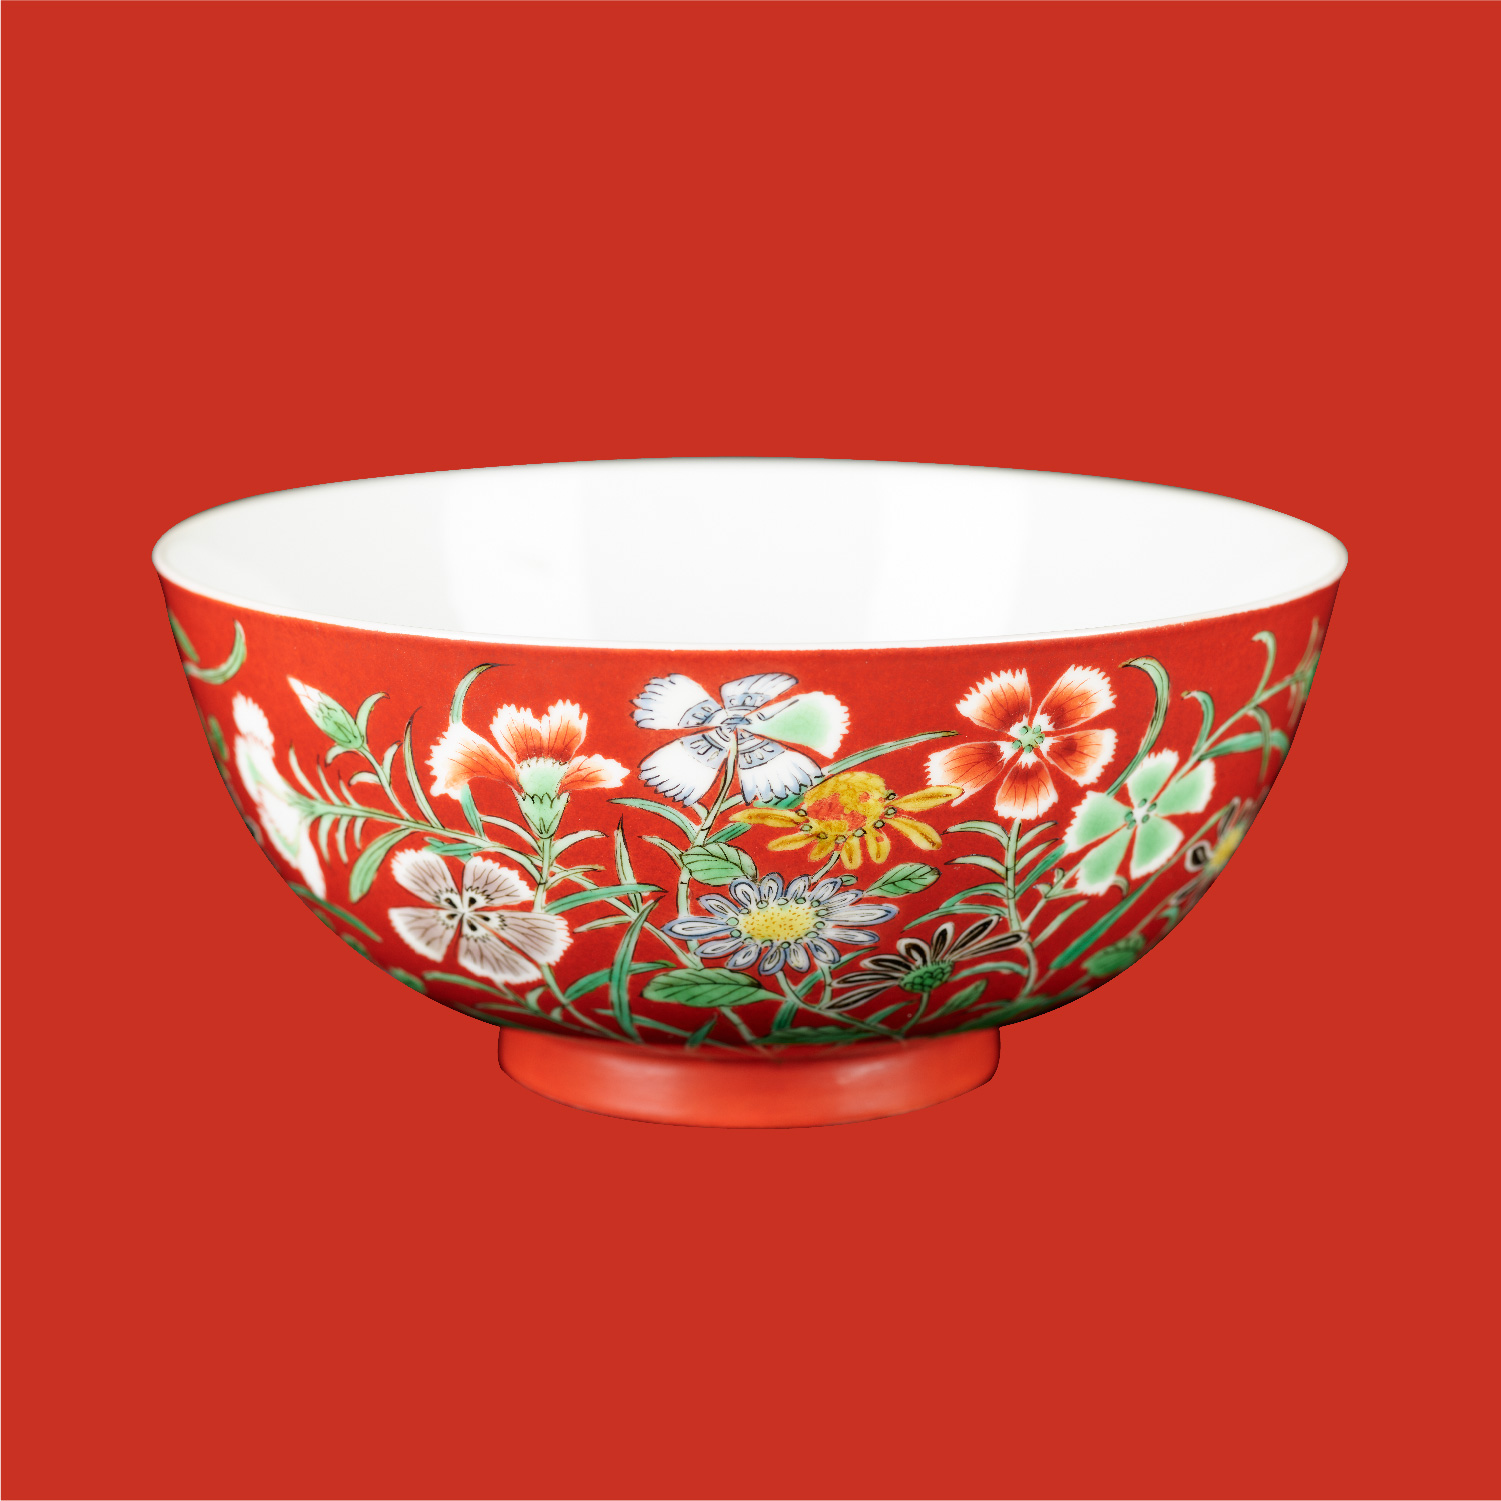 Bowl with floral design in <em>wucai</em> enamels on coral red ground